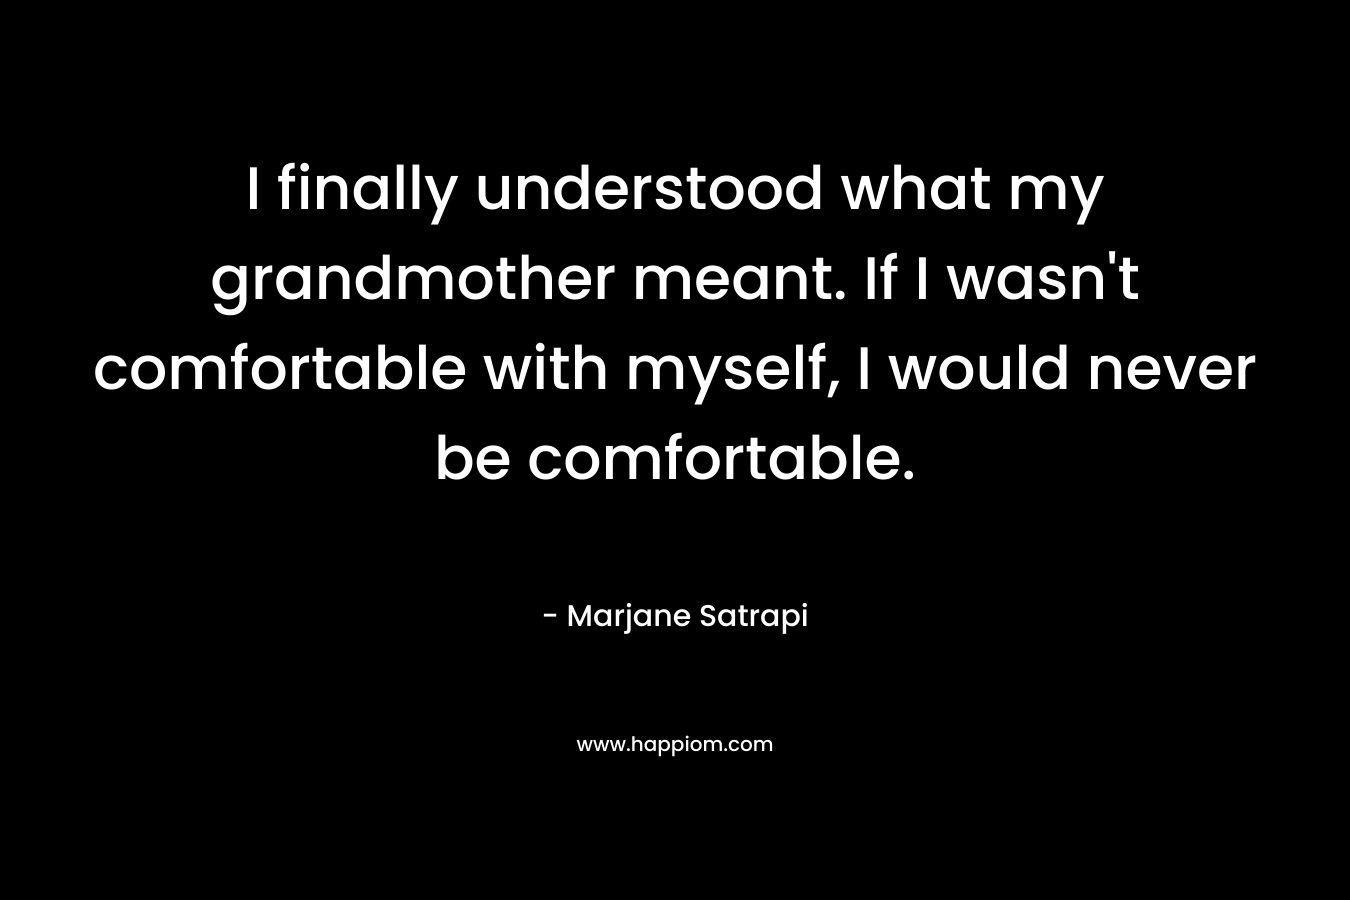 I finally understood what my grandmother meant. If I wasn’t comfortable with myself, I would never be comfortable. – Marjane Satrapi